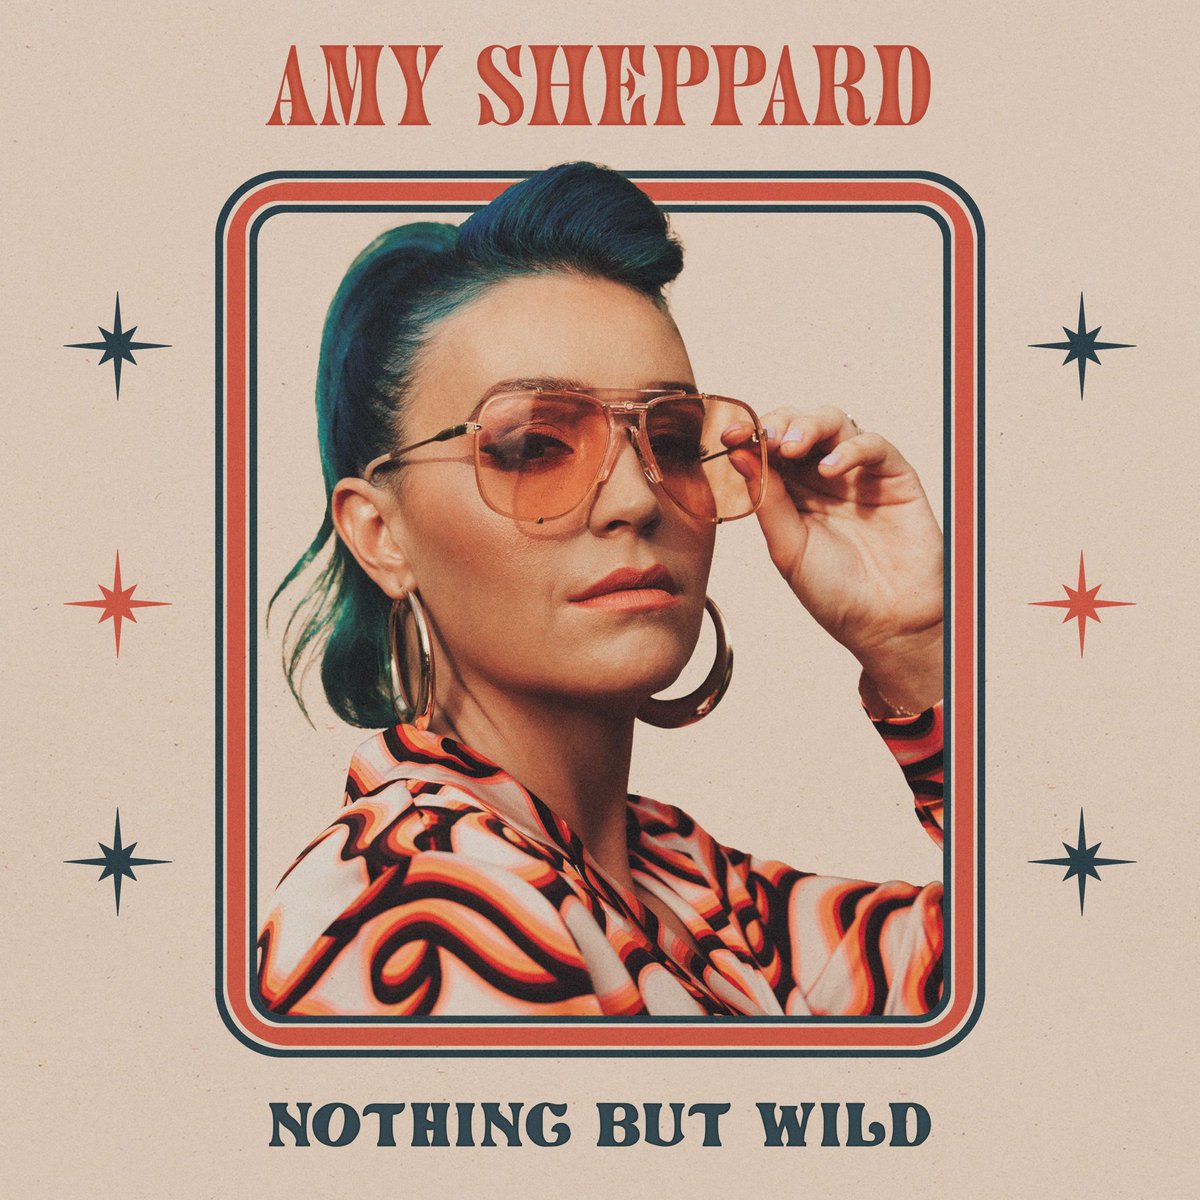 Amy Sheppard’s debut single, Nothing But Wild, out everywhere April 21st! Pre-save via link in our bio ♥️✨ @amysheppardpie